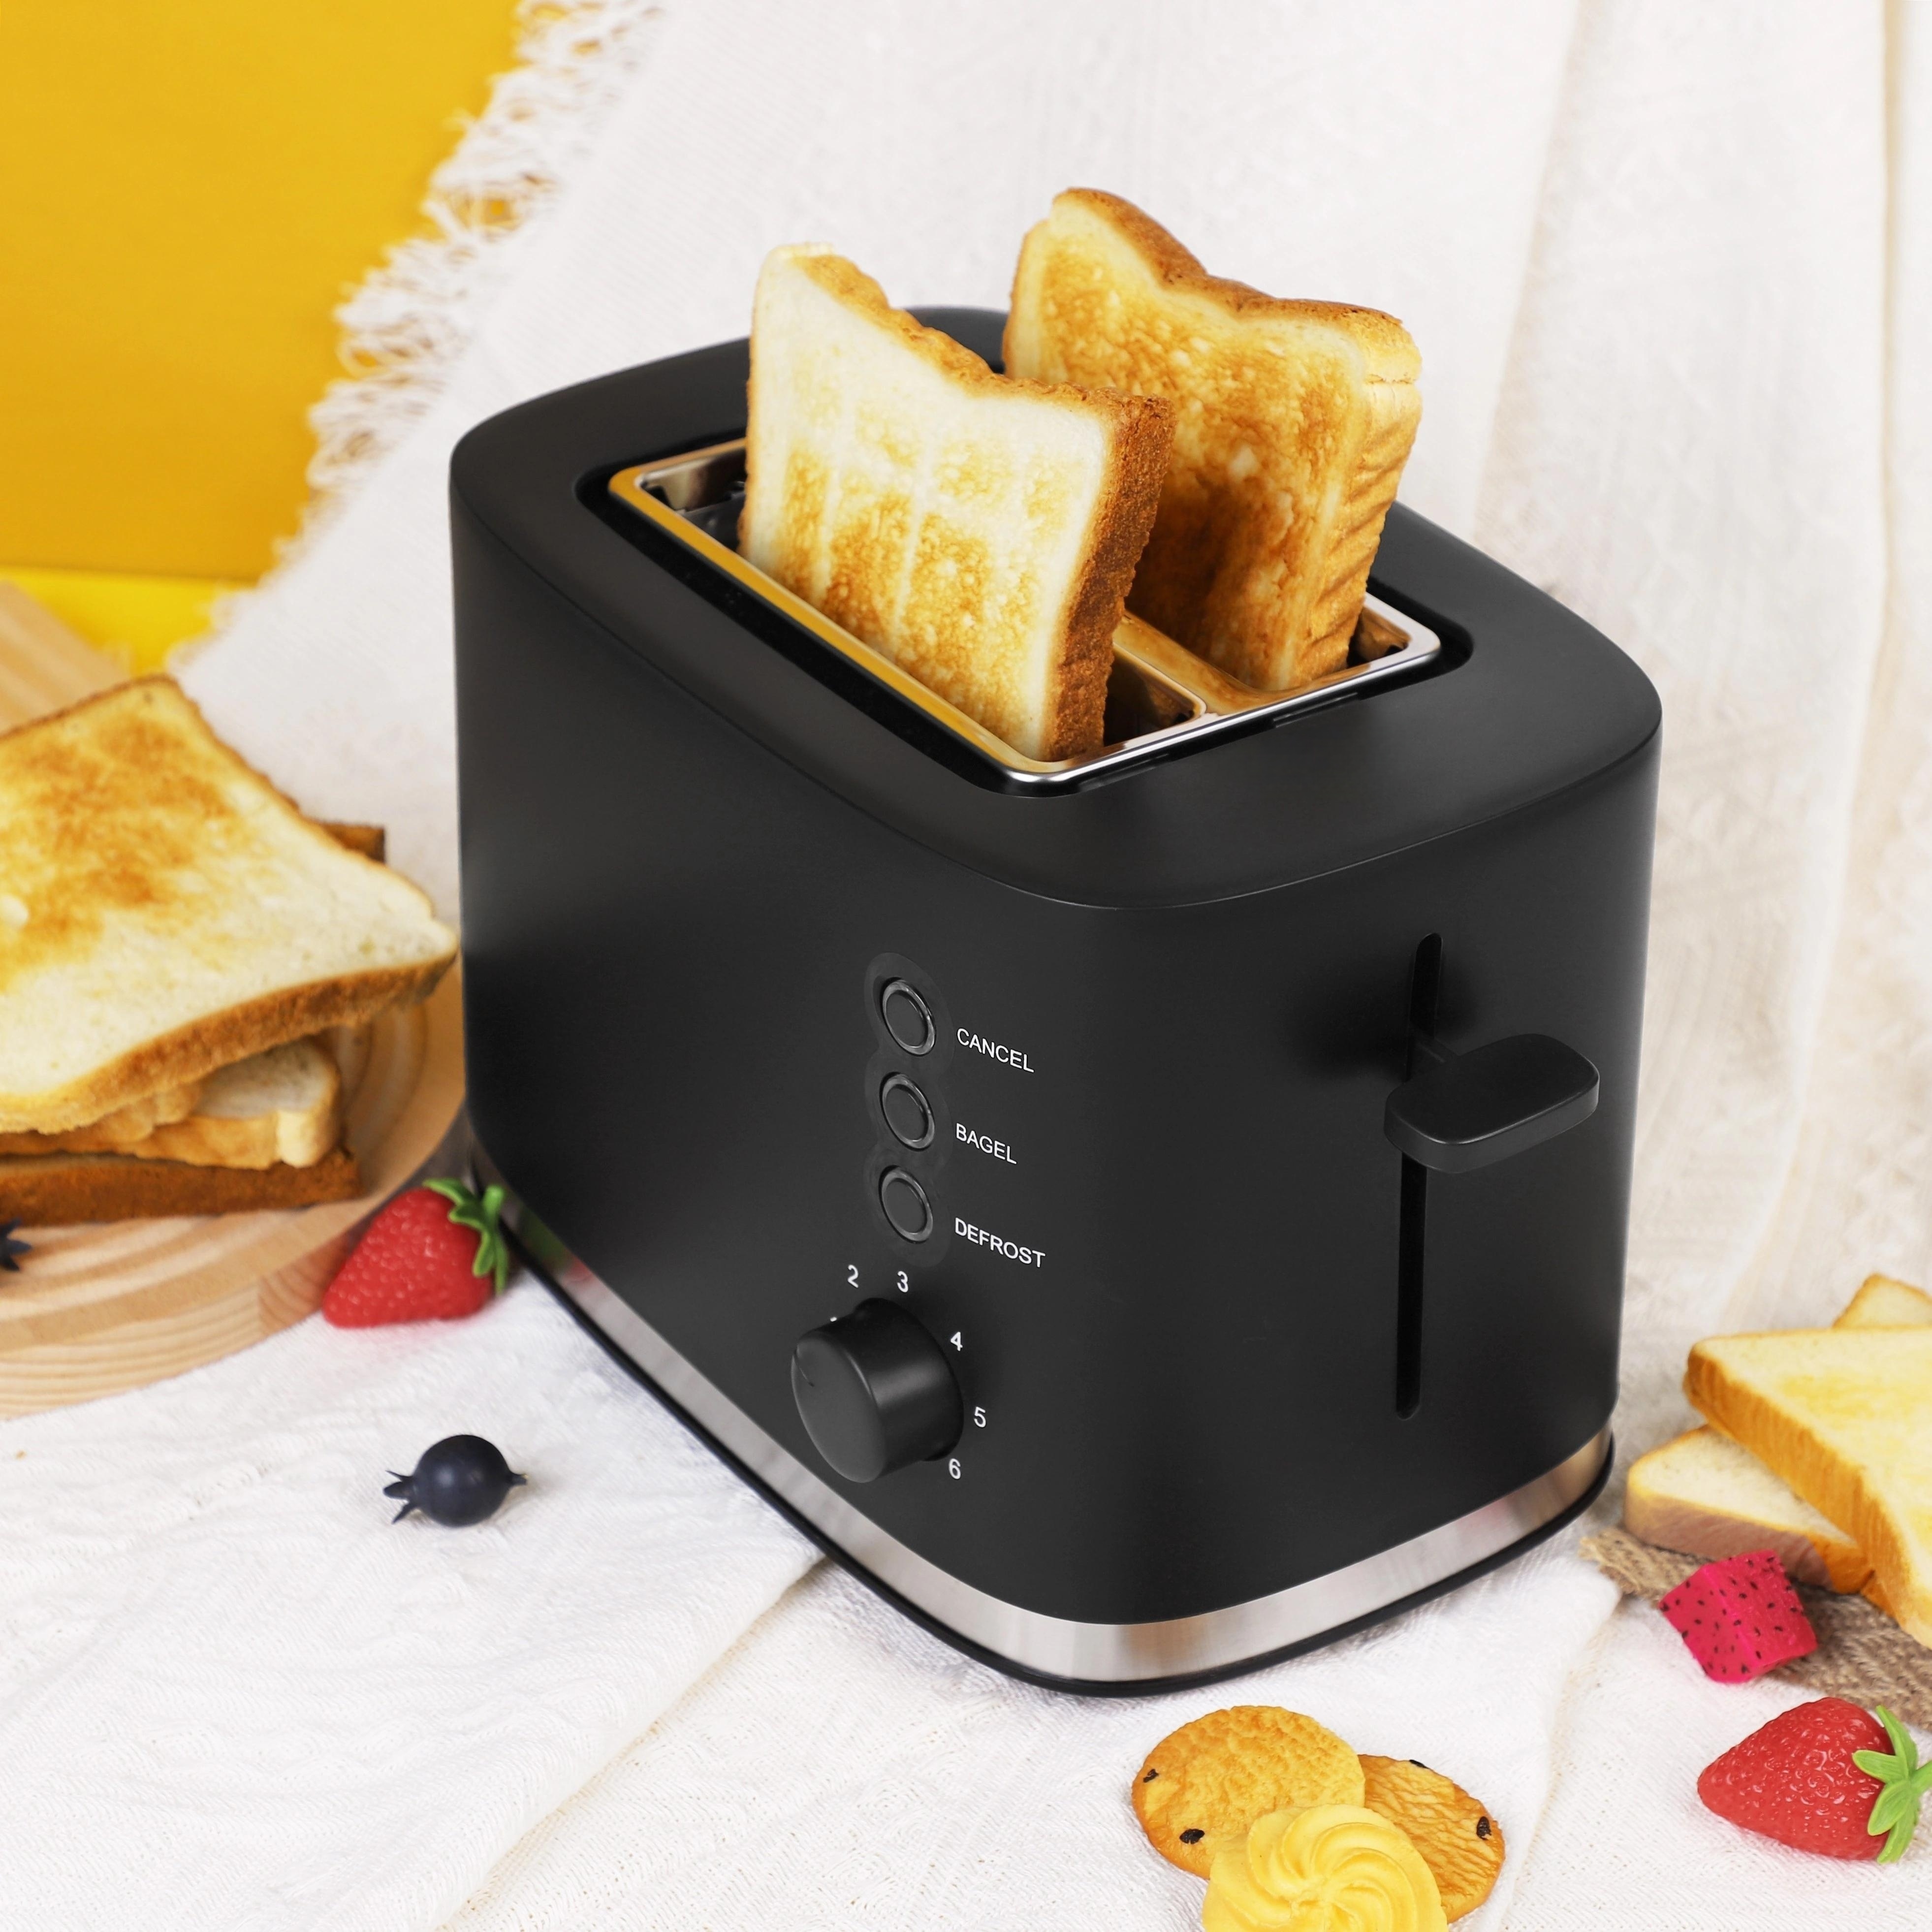 WHALL 4 Slice Toaster Stainless Steel,Toaster-6 Bread Shade